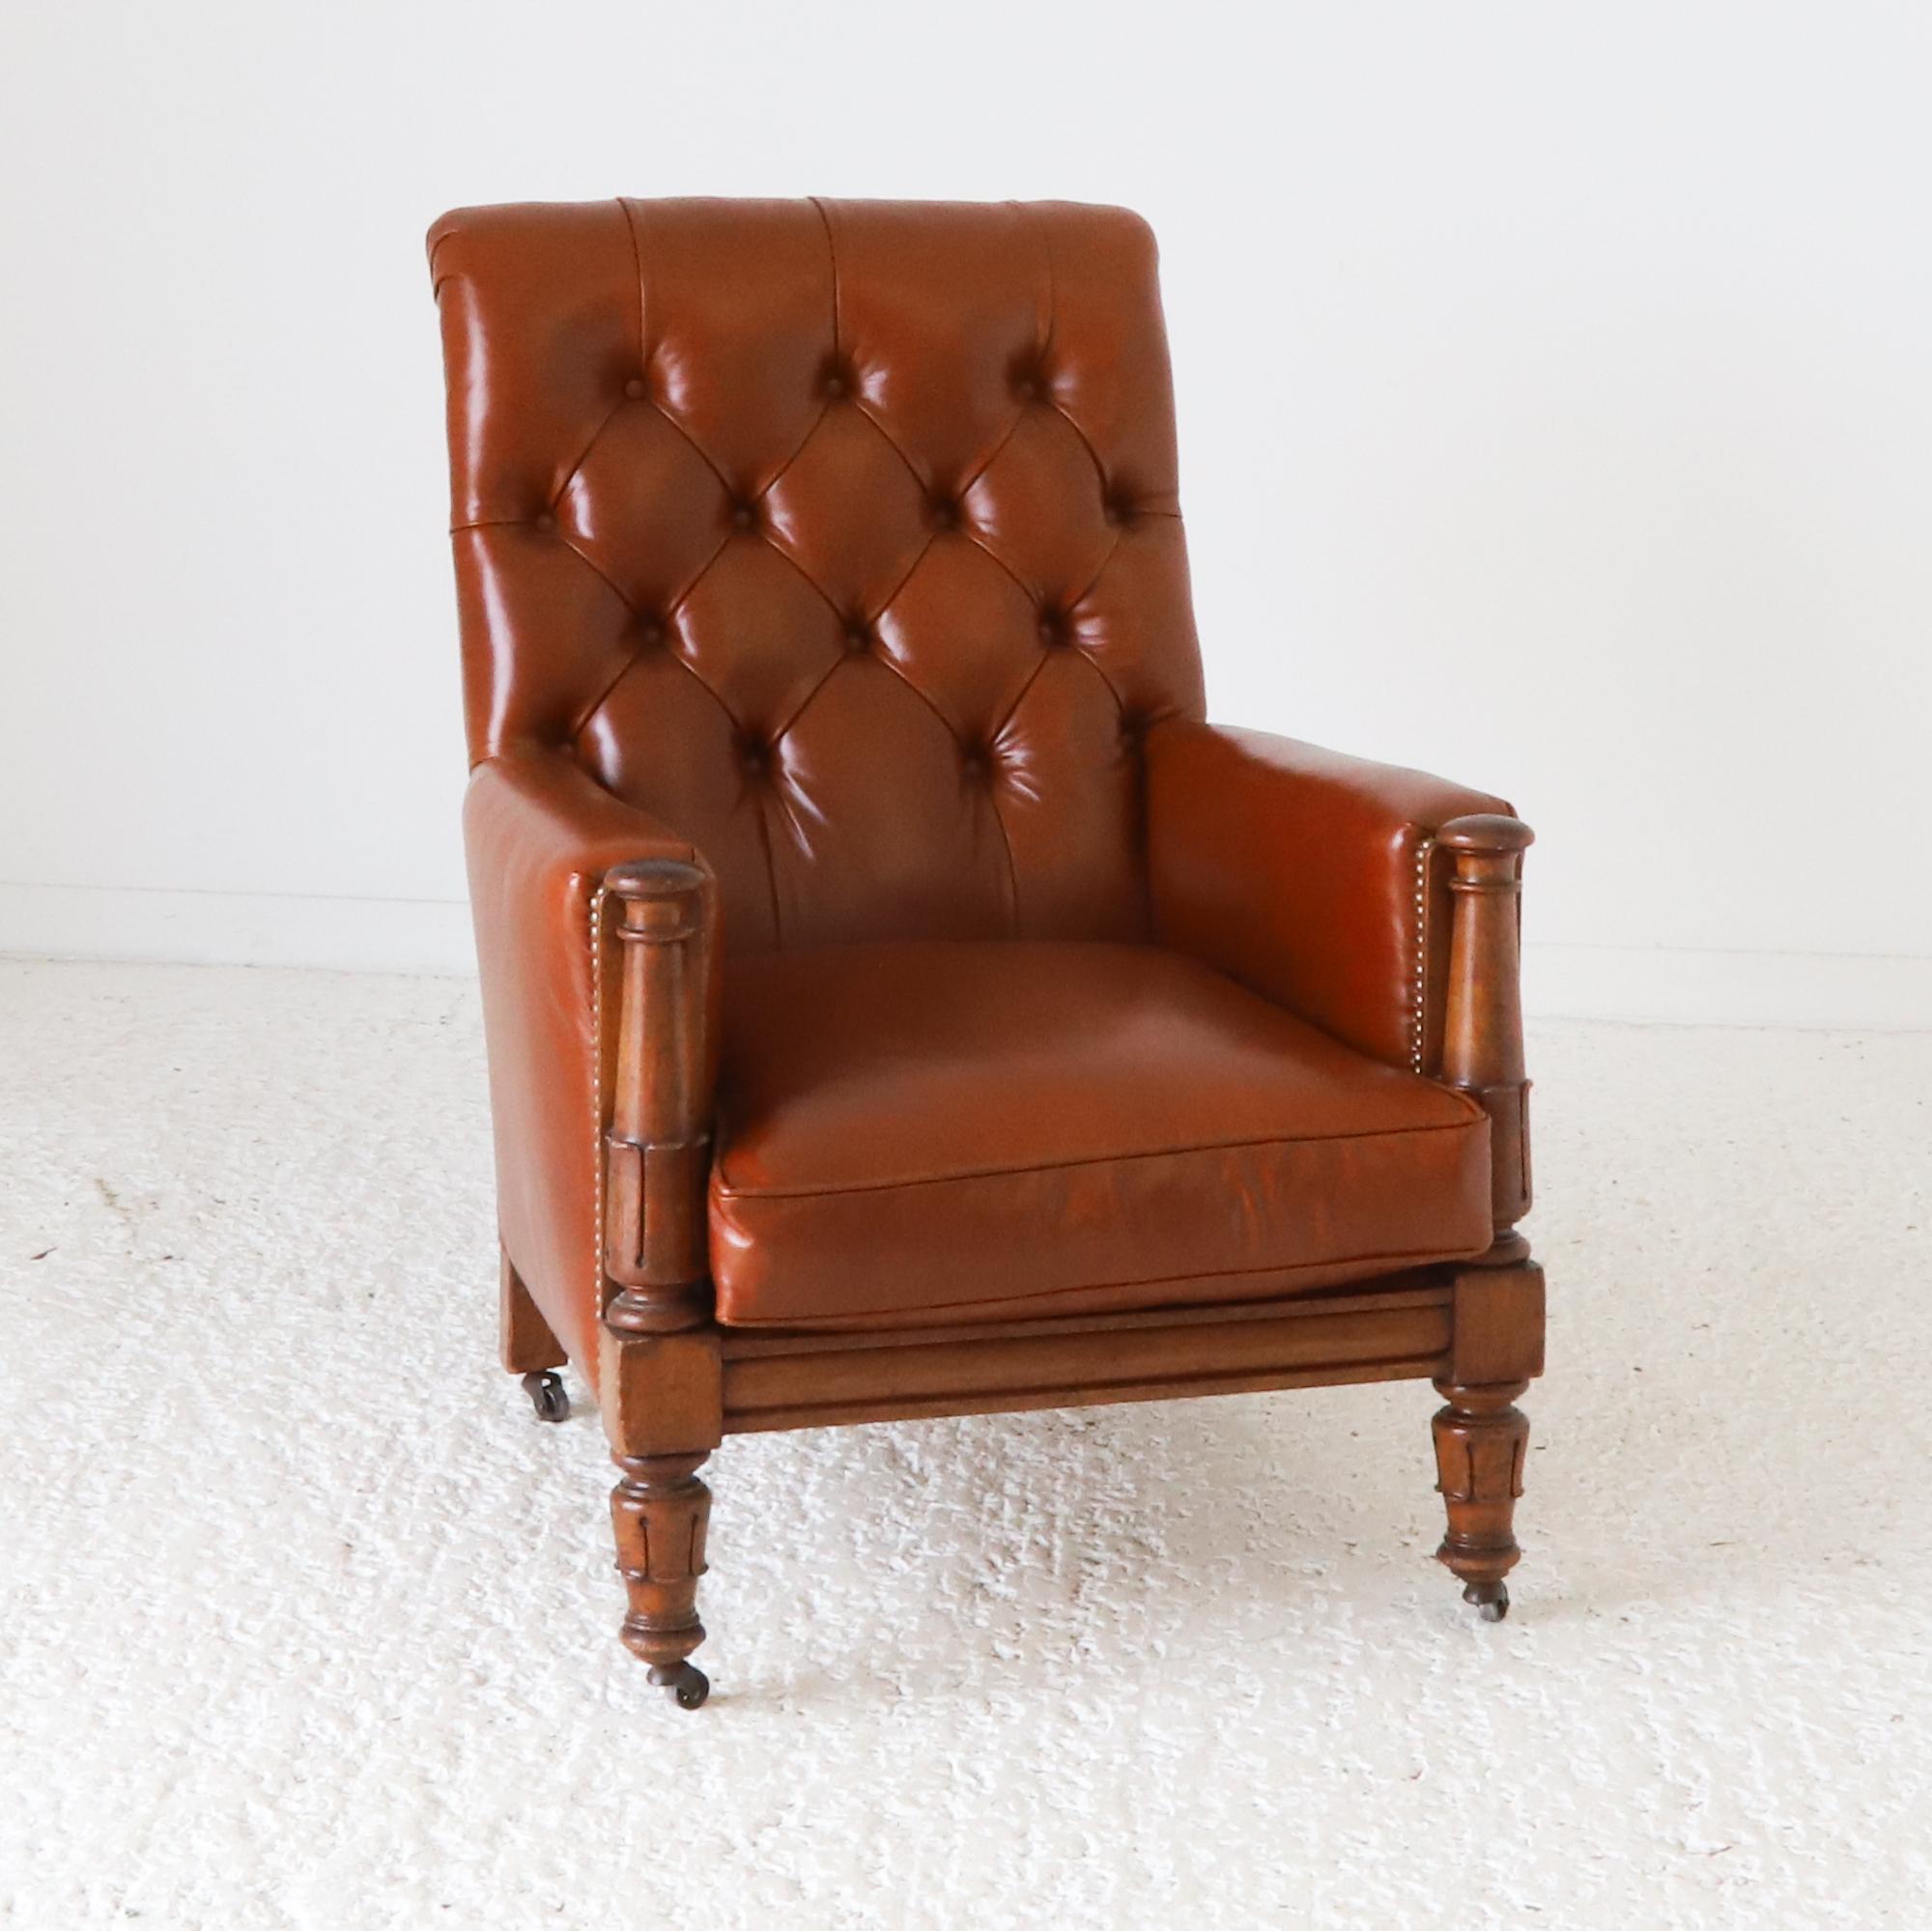 English c. 1830 Mahogany William IV Library Chair reupholstered in tan leather  In Good Condition For Sale In Arundel, GB